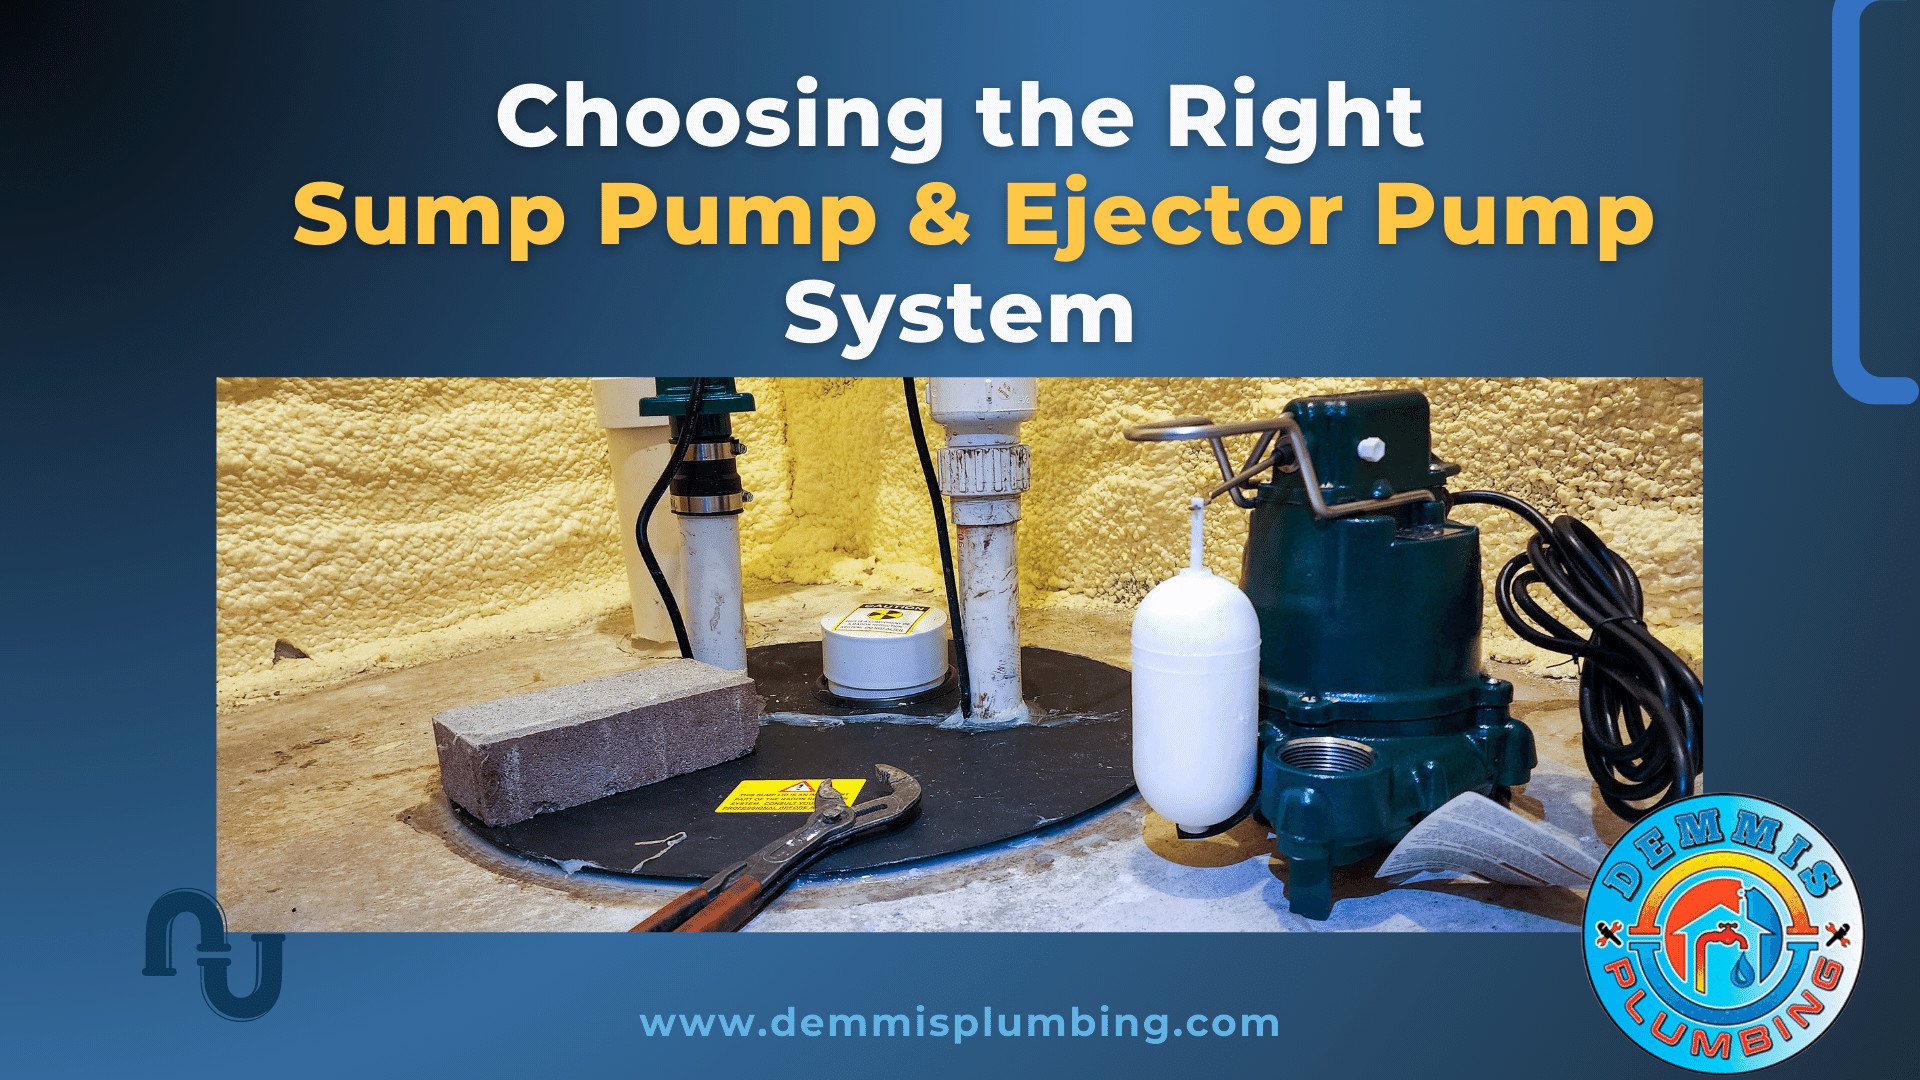 Choosing the Right Sump Pump & Ejector Pump System